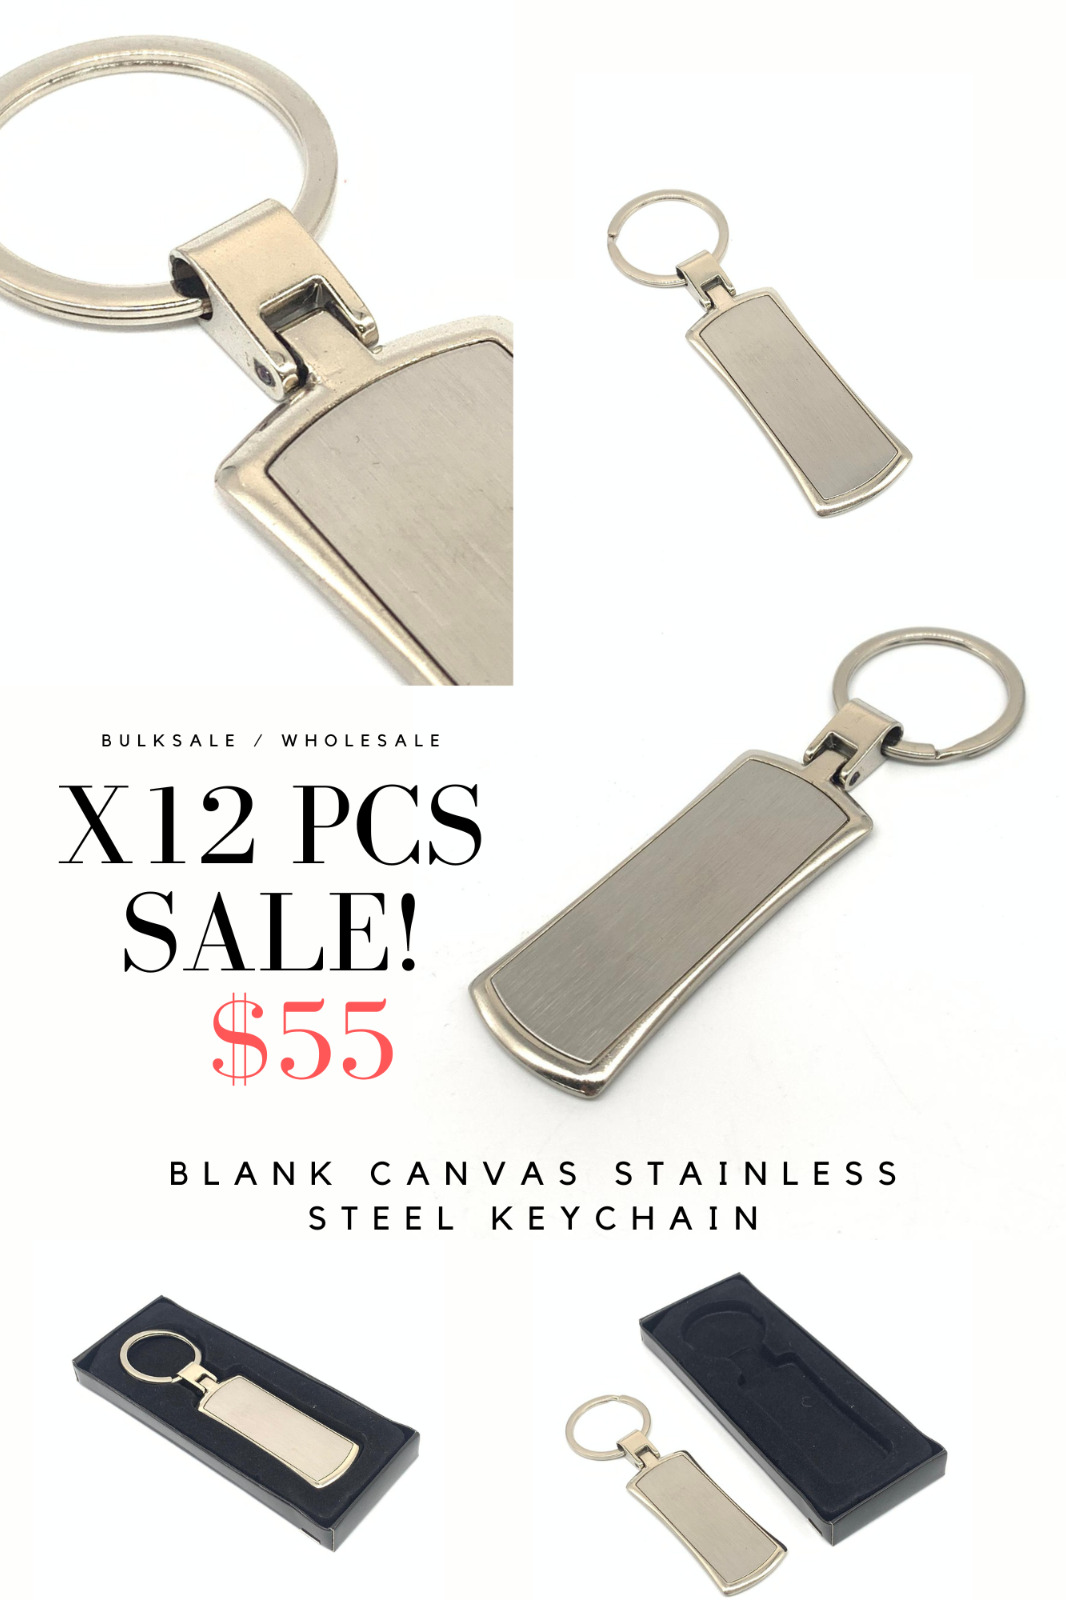 Stainless steel keychain Engravable long square shape blank polished gift x12pcs